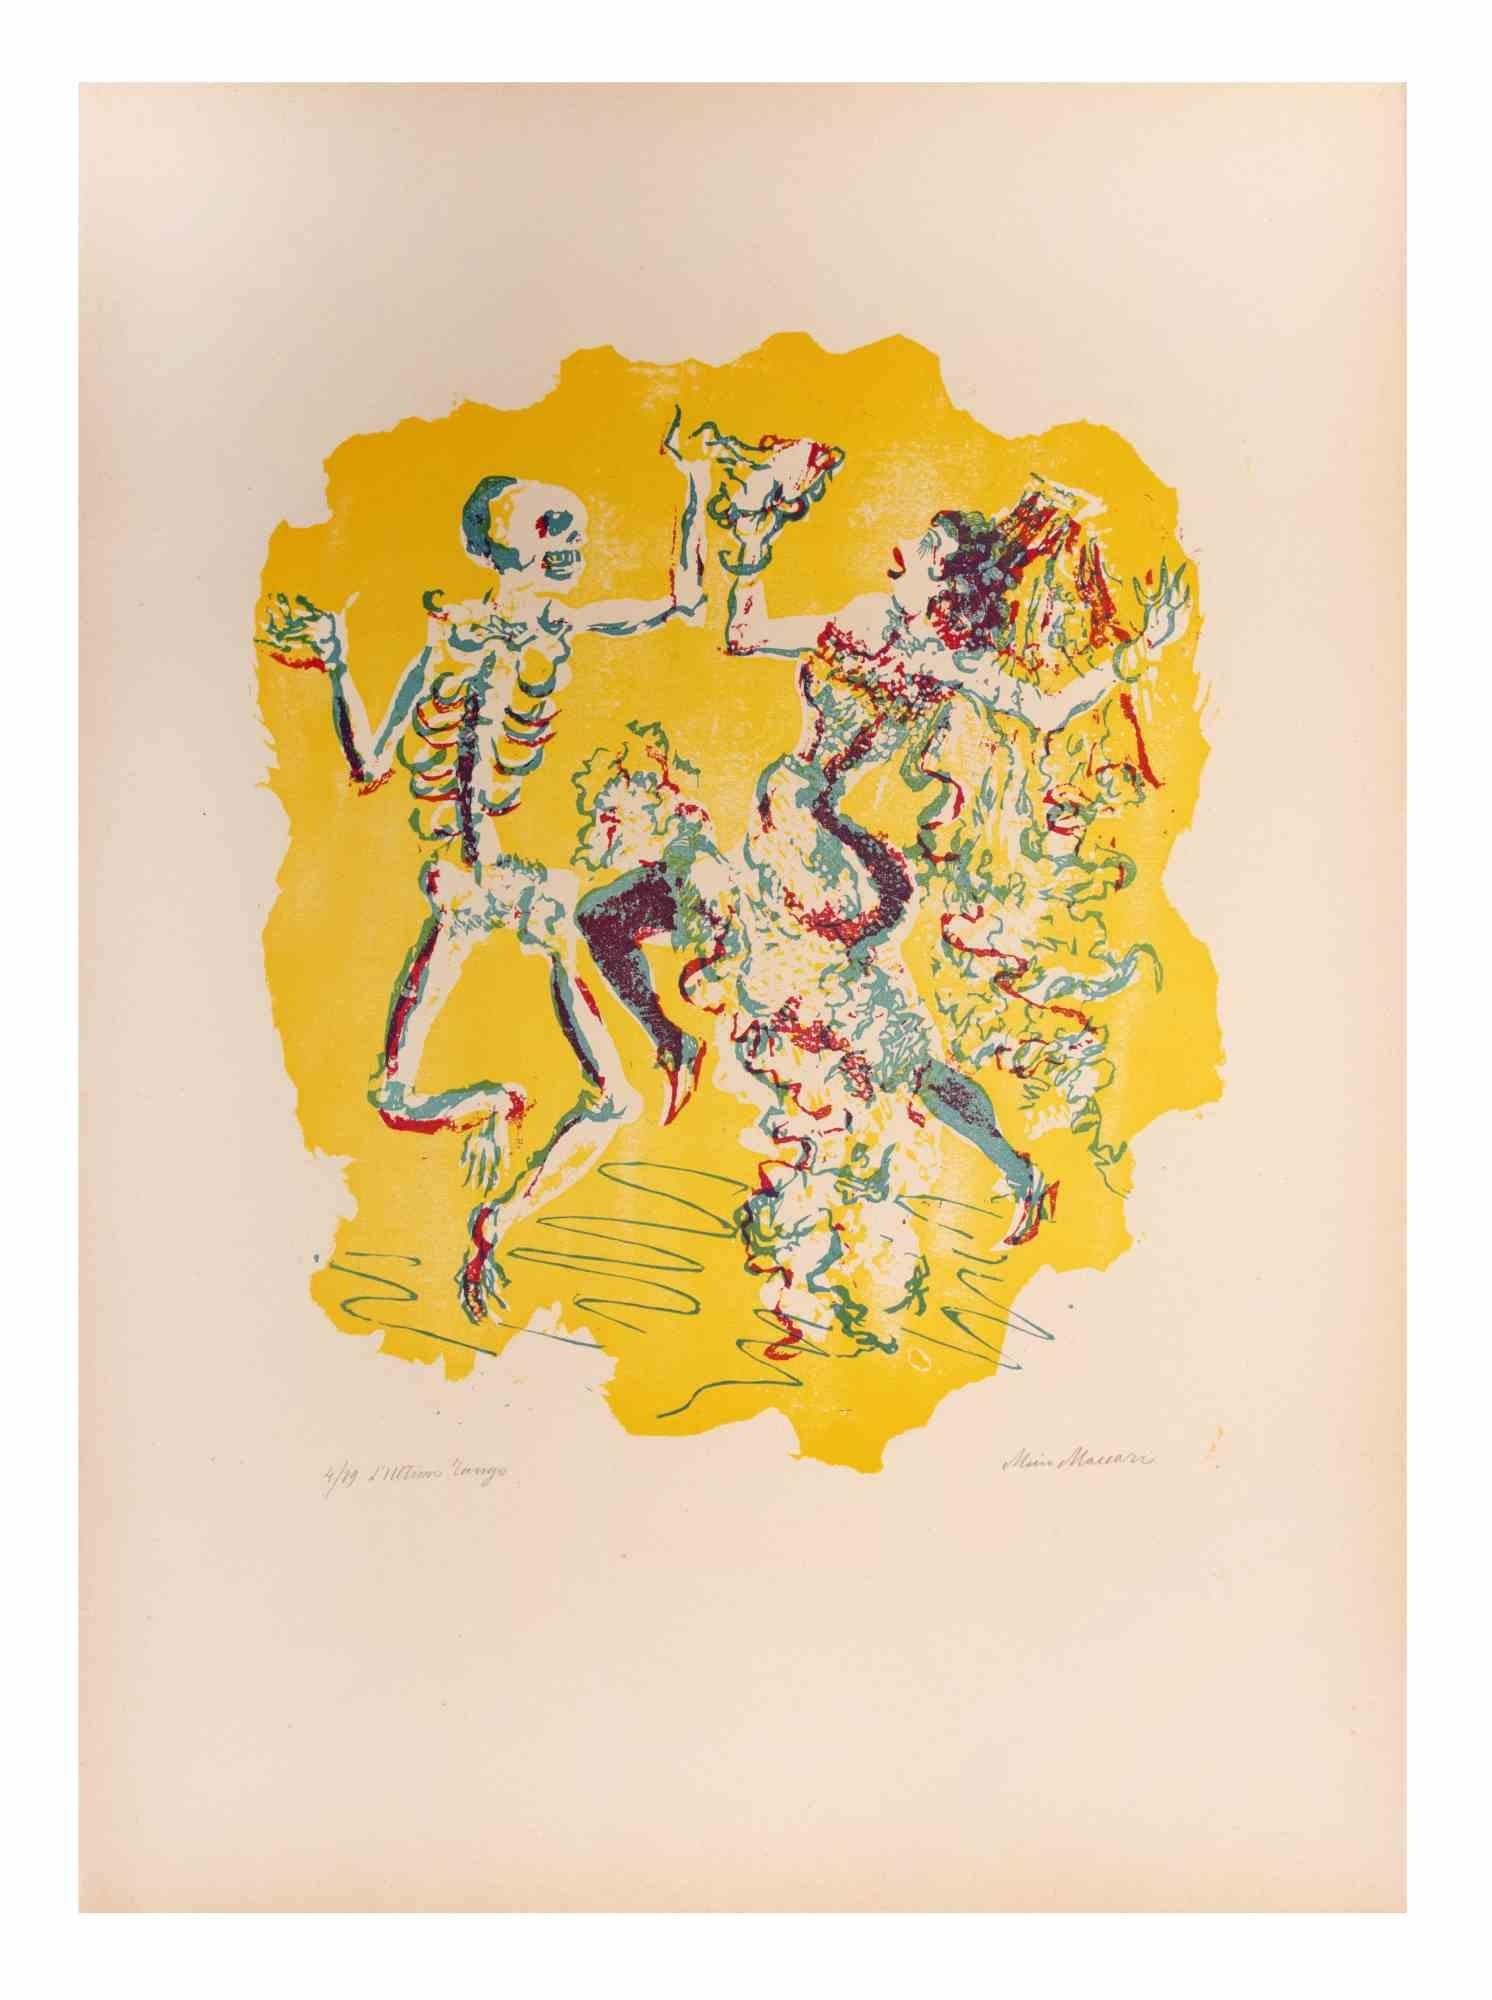 The Last Tango is an Artwork realized by Mino Maccari  (1924-1989) in the Mid-20th Century.

Colored woodcut on paper. Hand-signed on the lower, numbered 4/89 specimens and titled on the left margin.

Good conditions.

Mino Maccari (Siena,